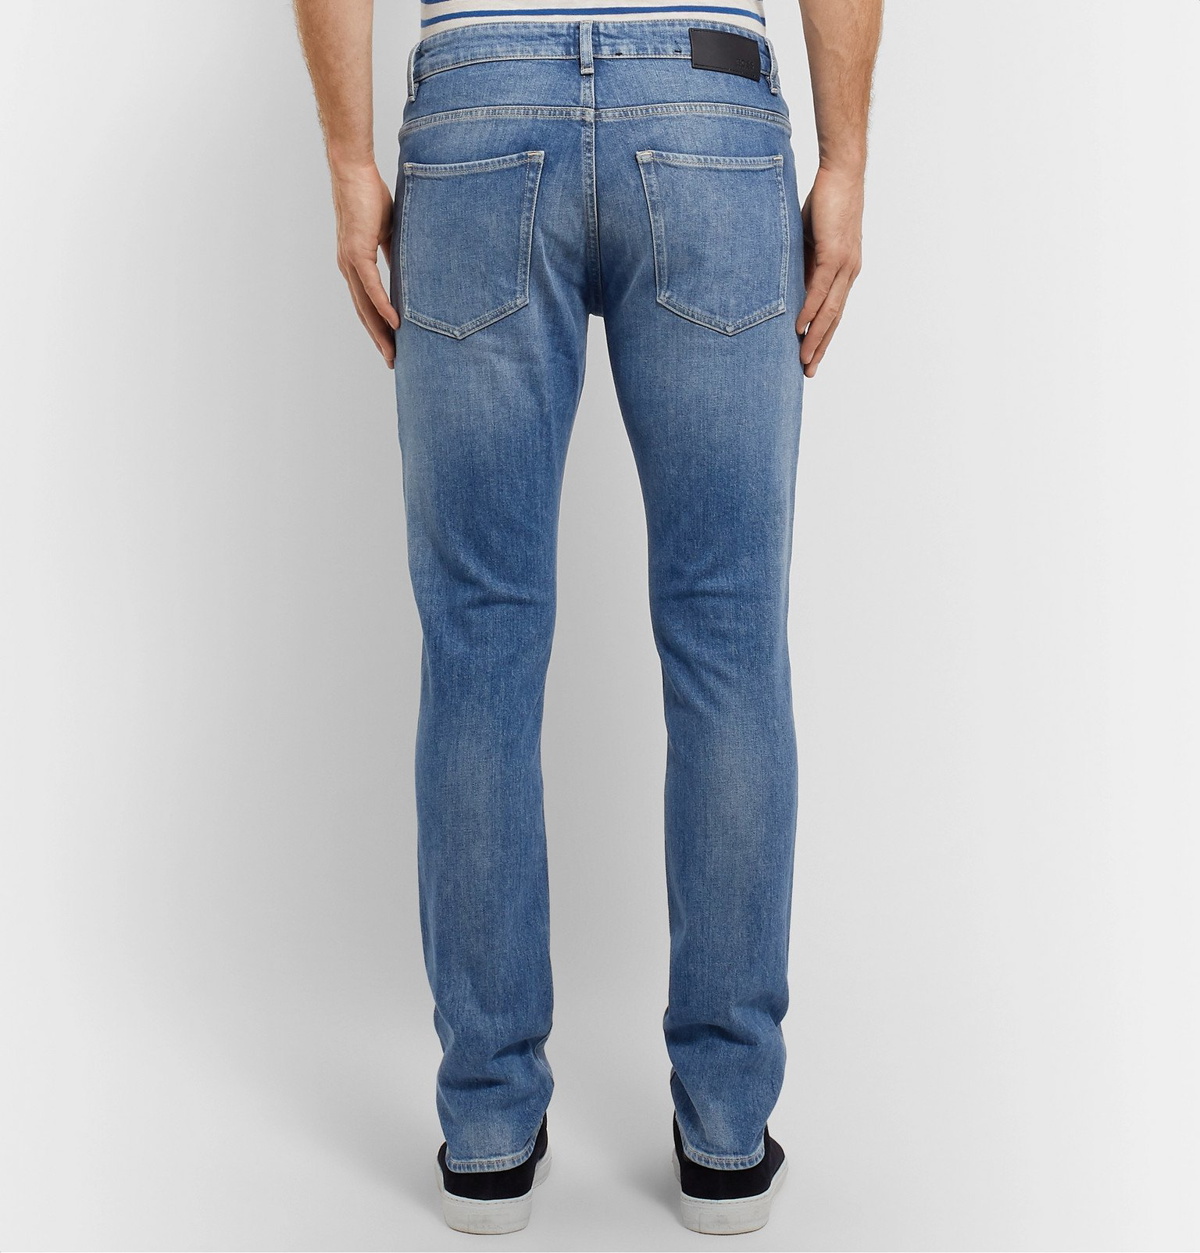 Hugo Boss Slim Fit Jeans at FORZIERI